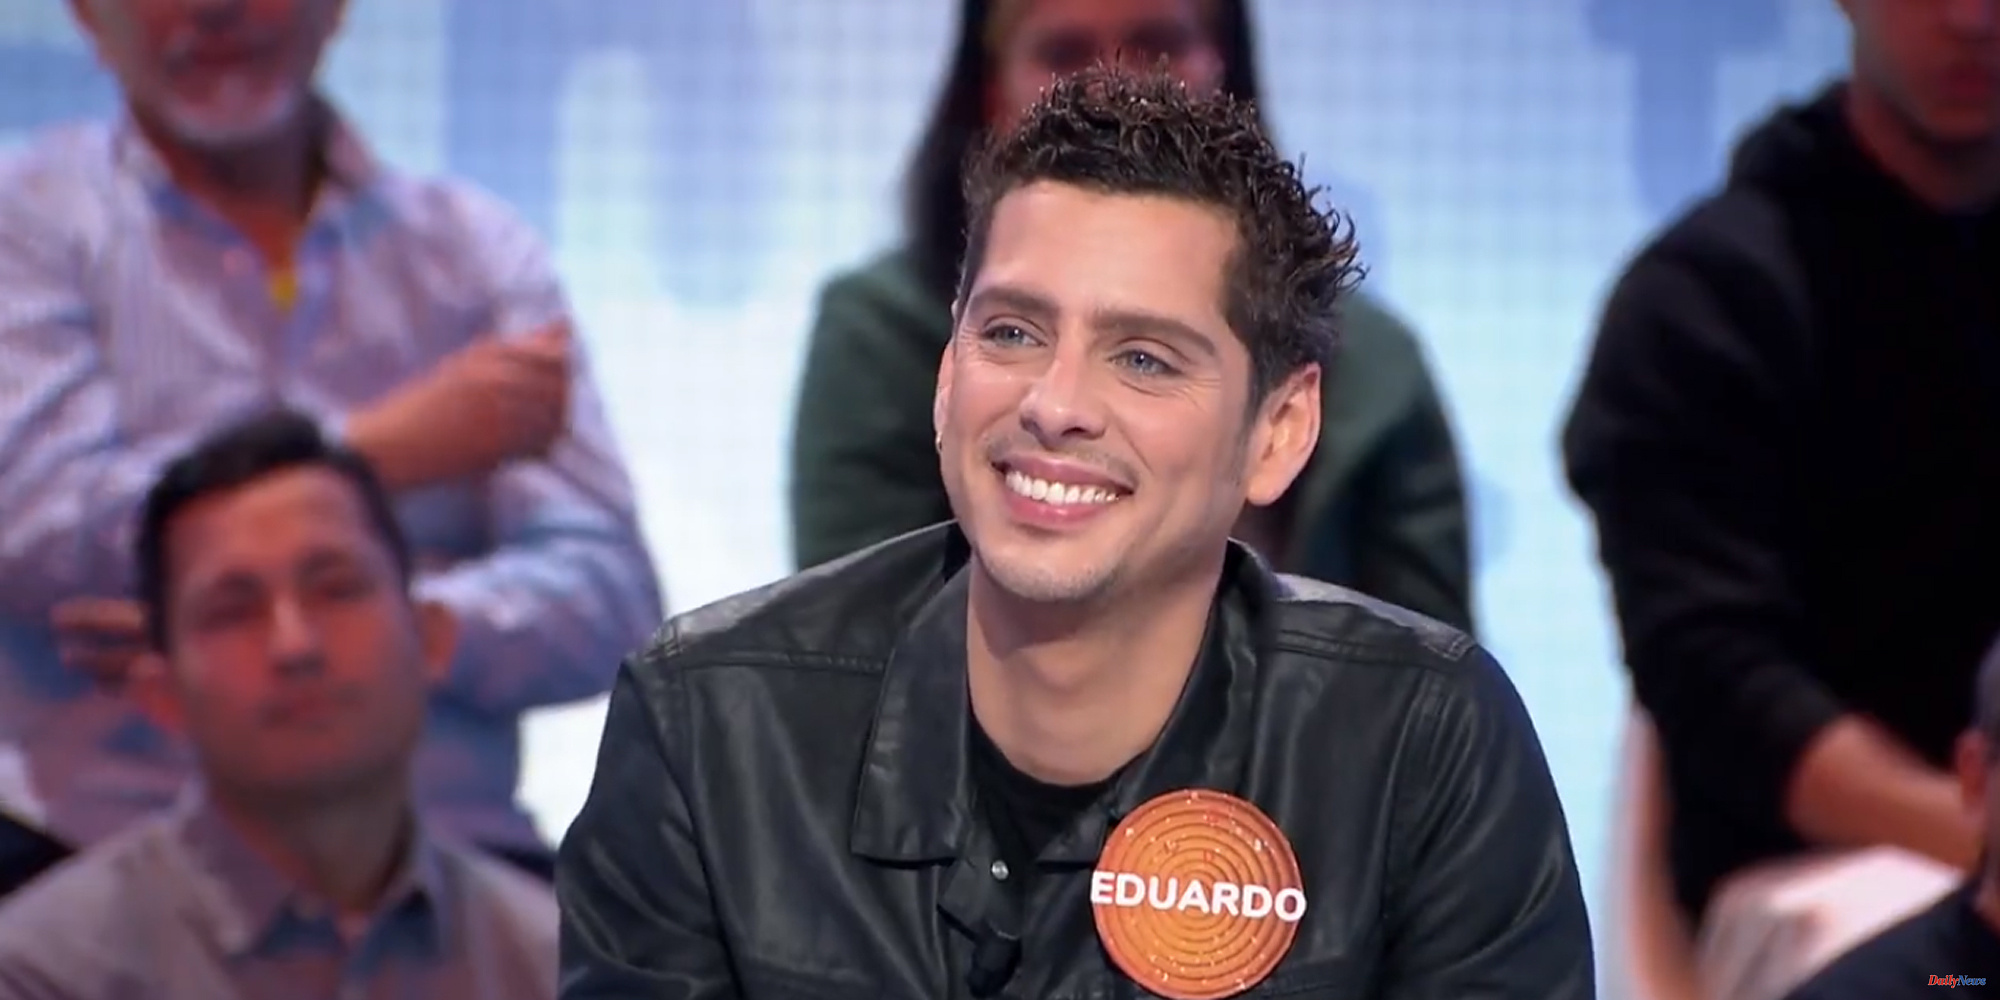 Television Who is Eduardo Casanova, the new guest of Pasapalabra